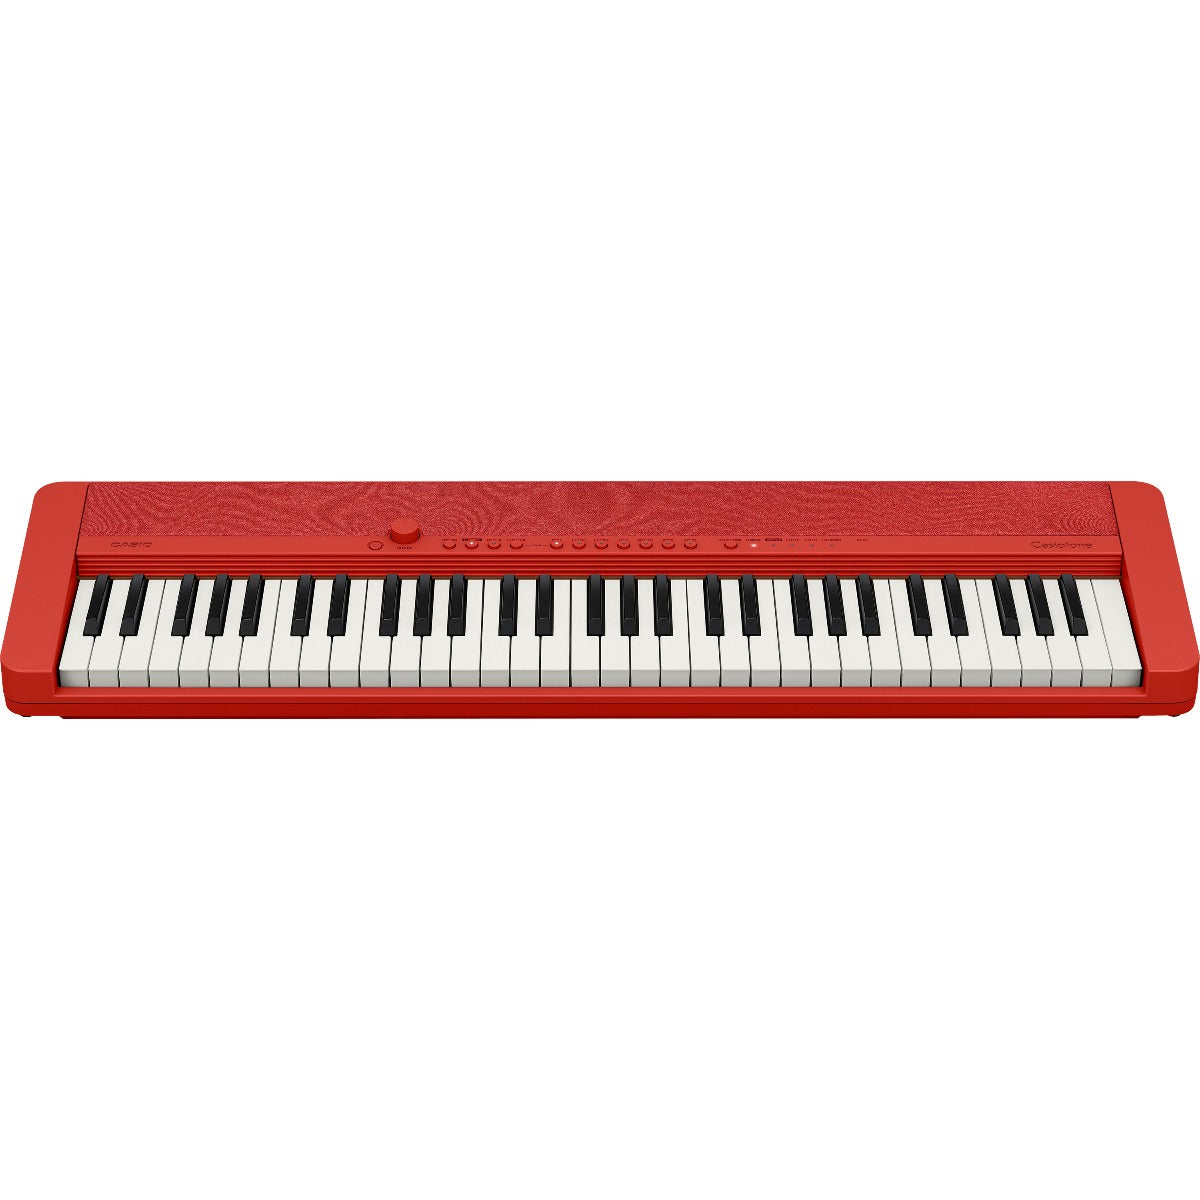 Perspective view of Casio Casiotone CT-S1 Portable Keyboard - Red showing top and front